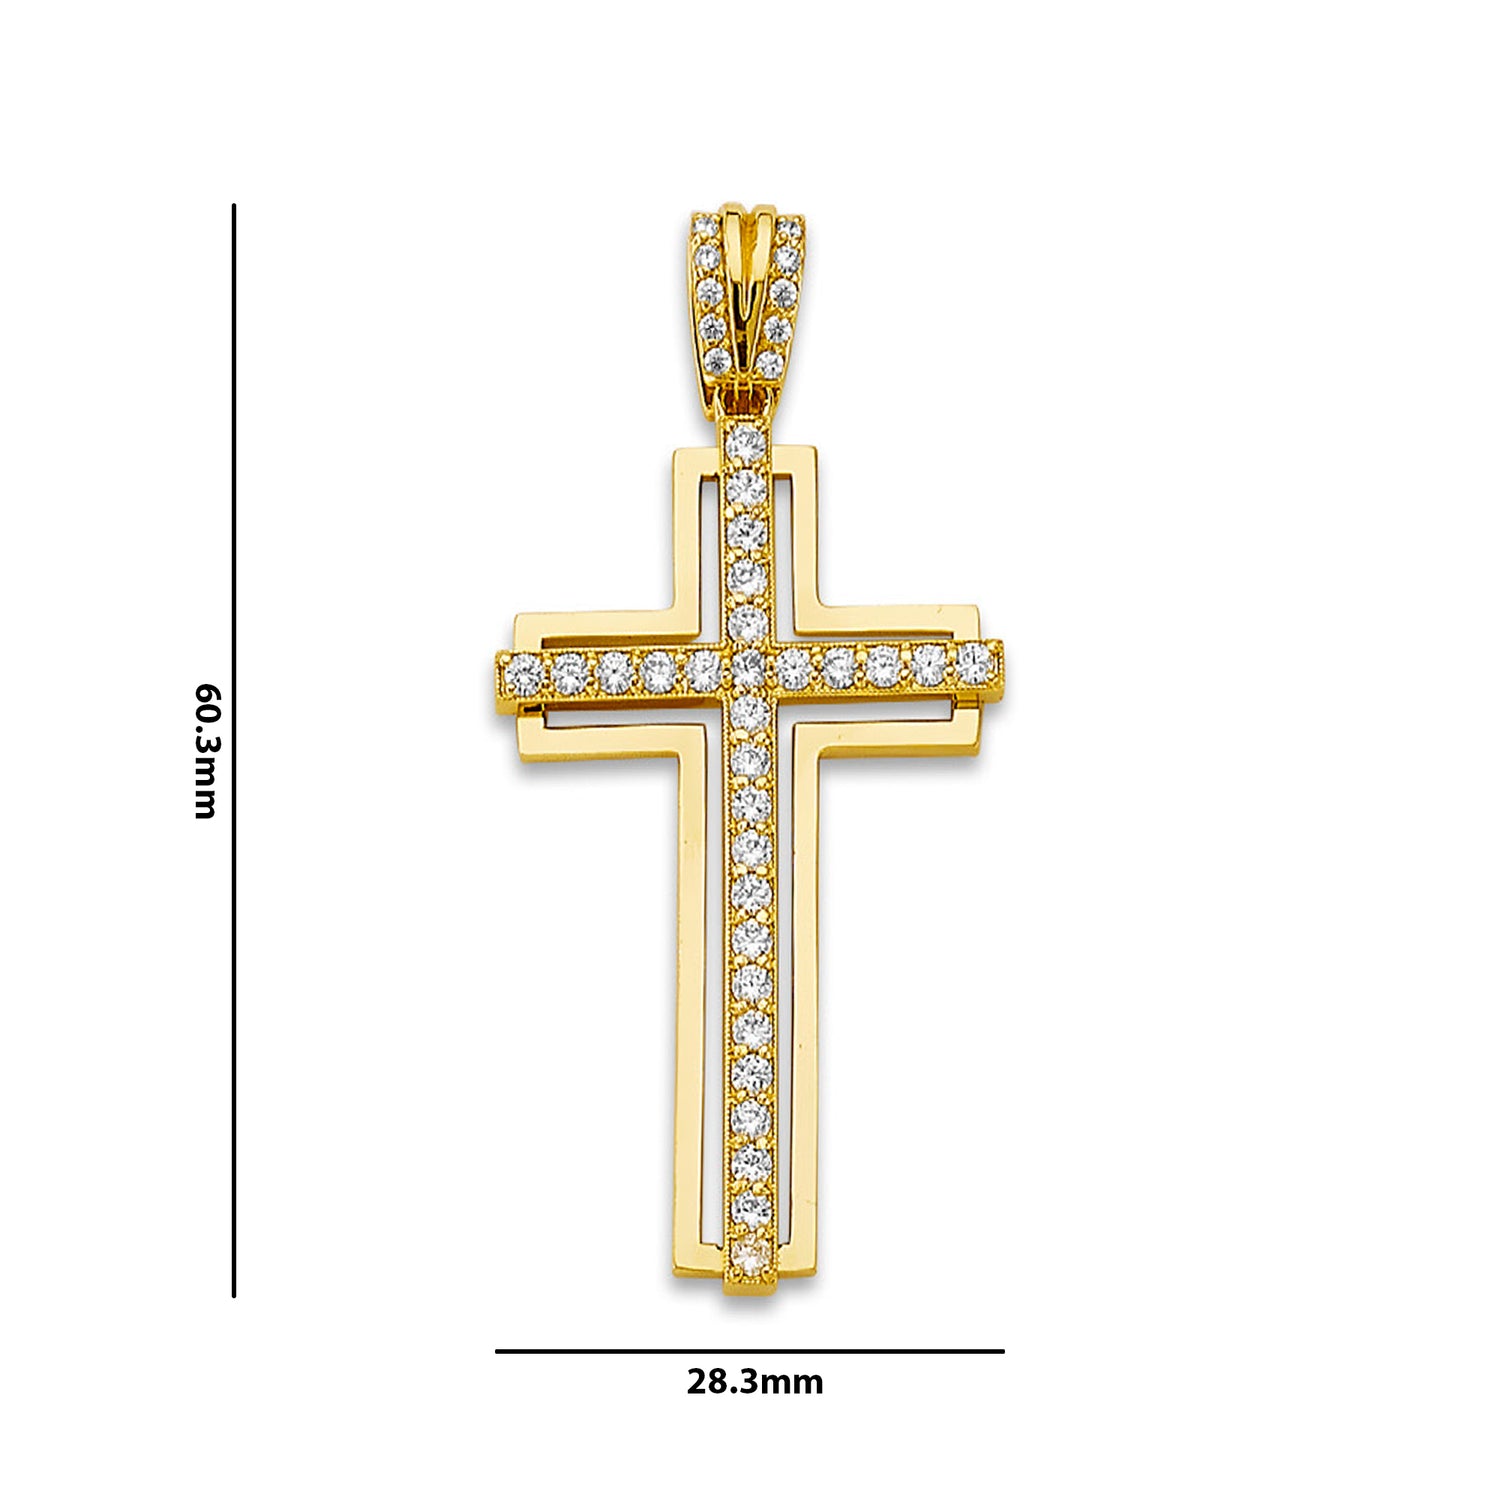 Yellow Gold CZ Studded Cross on Outline Cross Pendant with Measurement